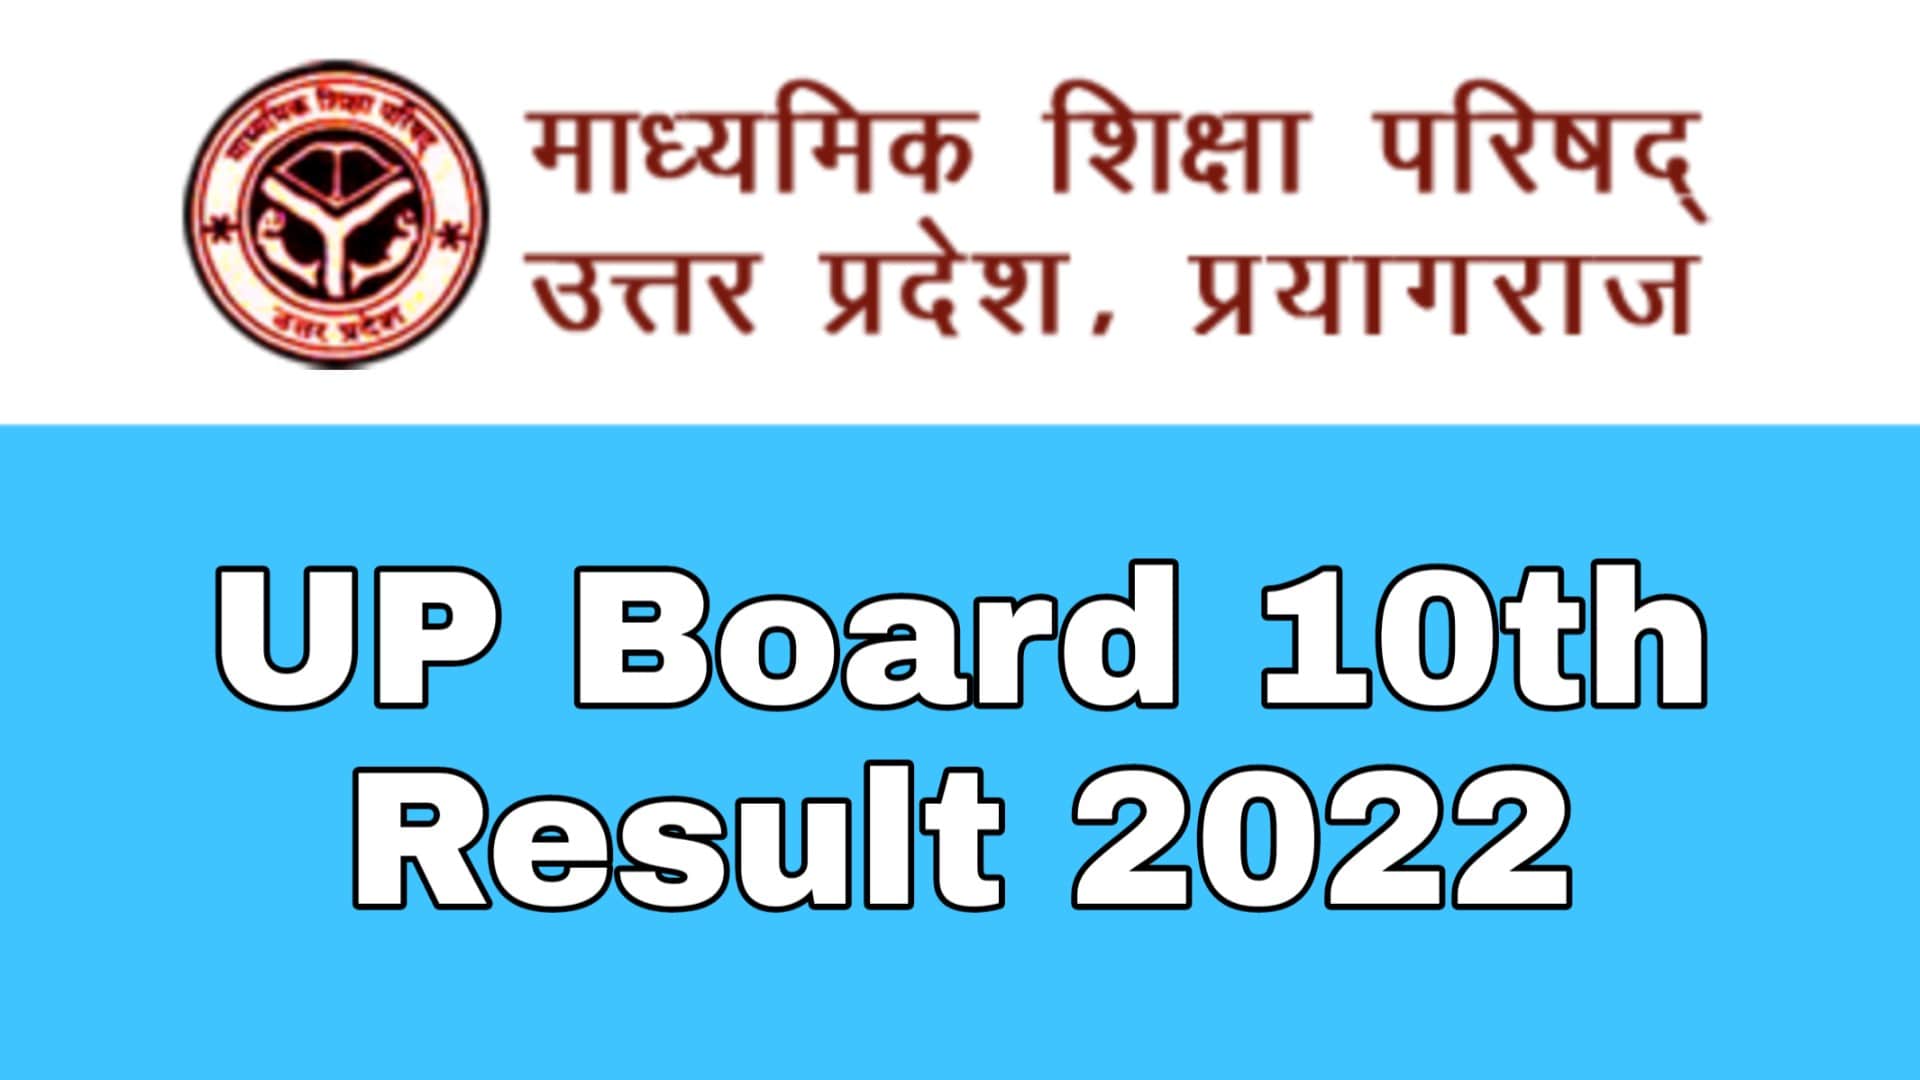 UP Board 10th Result 2022 - Date, Direct Link @upresults.nic.in